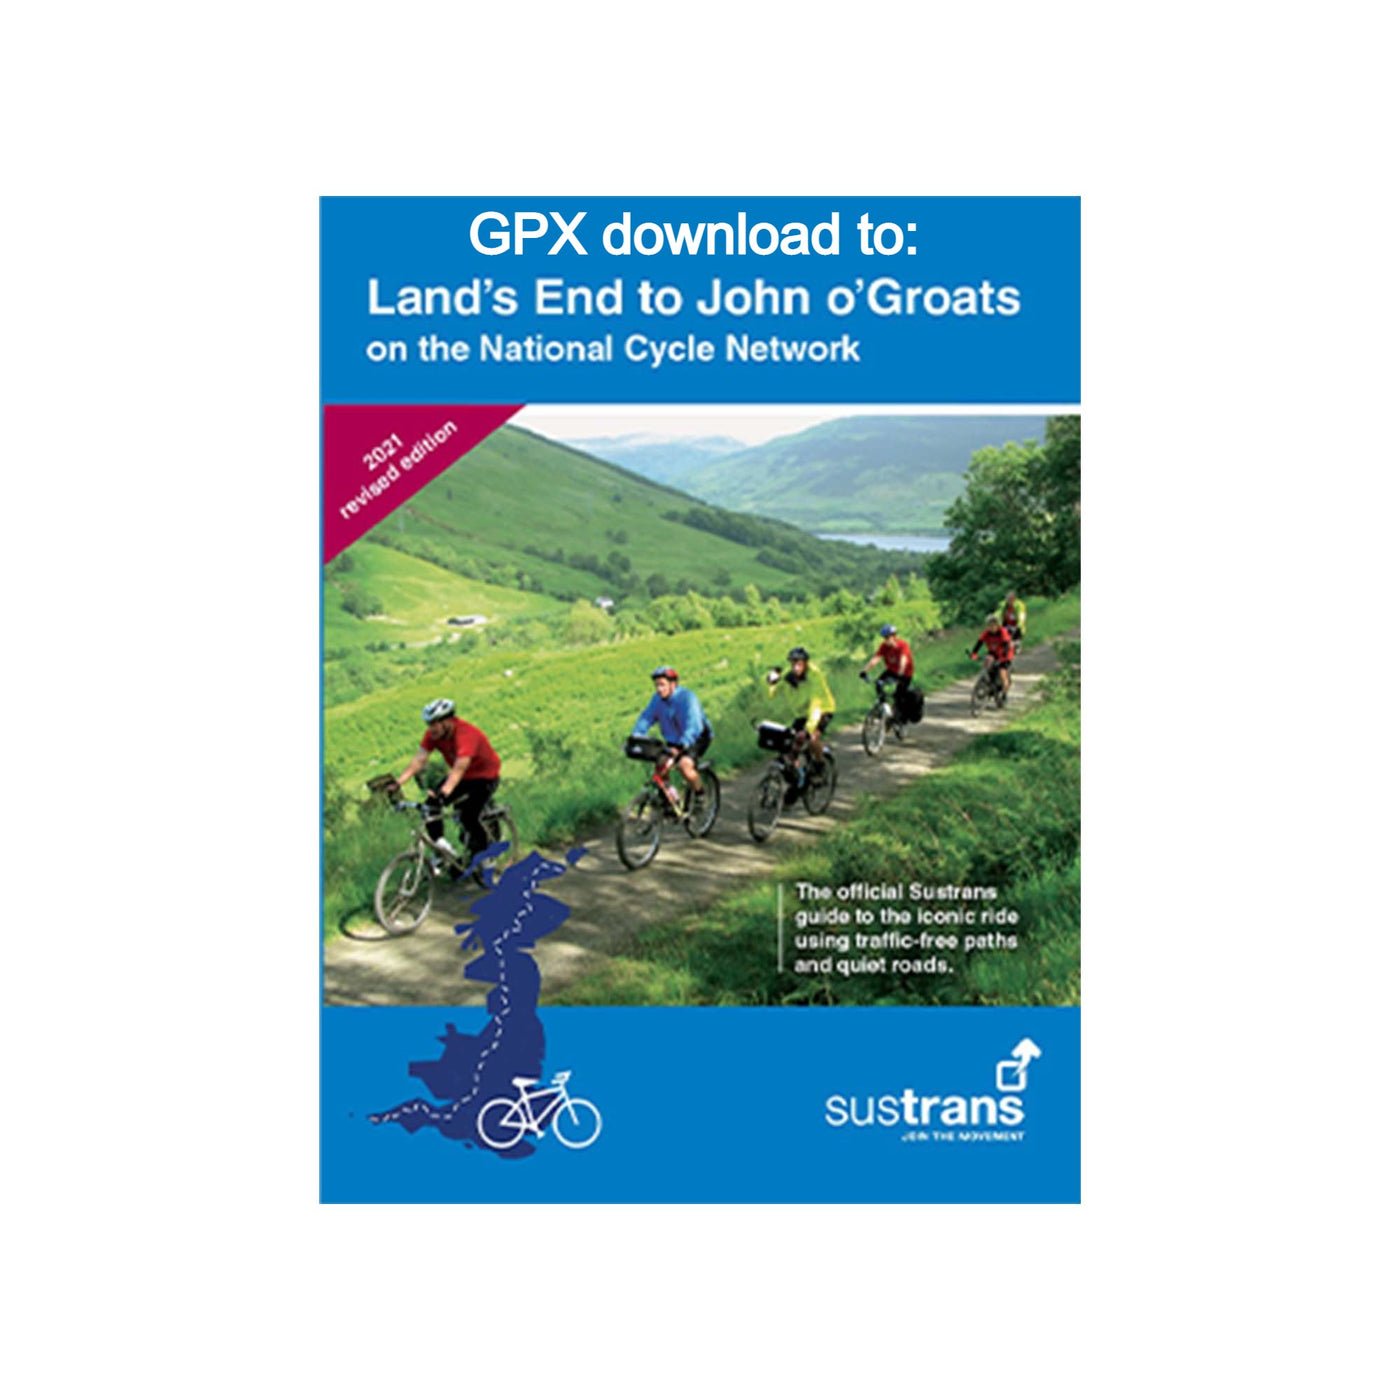 The official Sustrans GPX route to the Land's End to John o'Groats cycle ride on the National Cycle Network